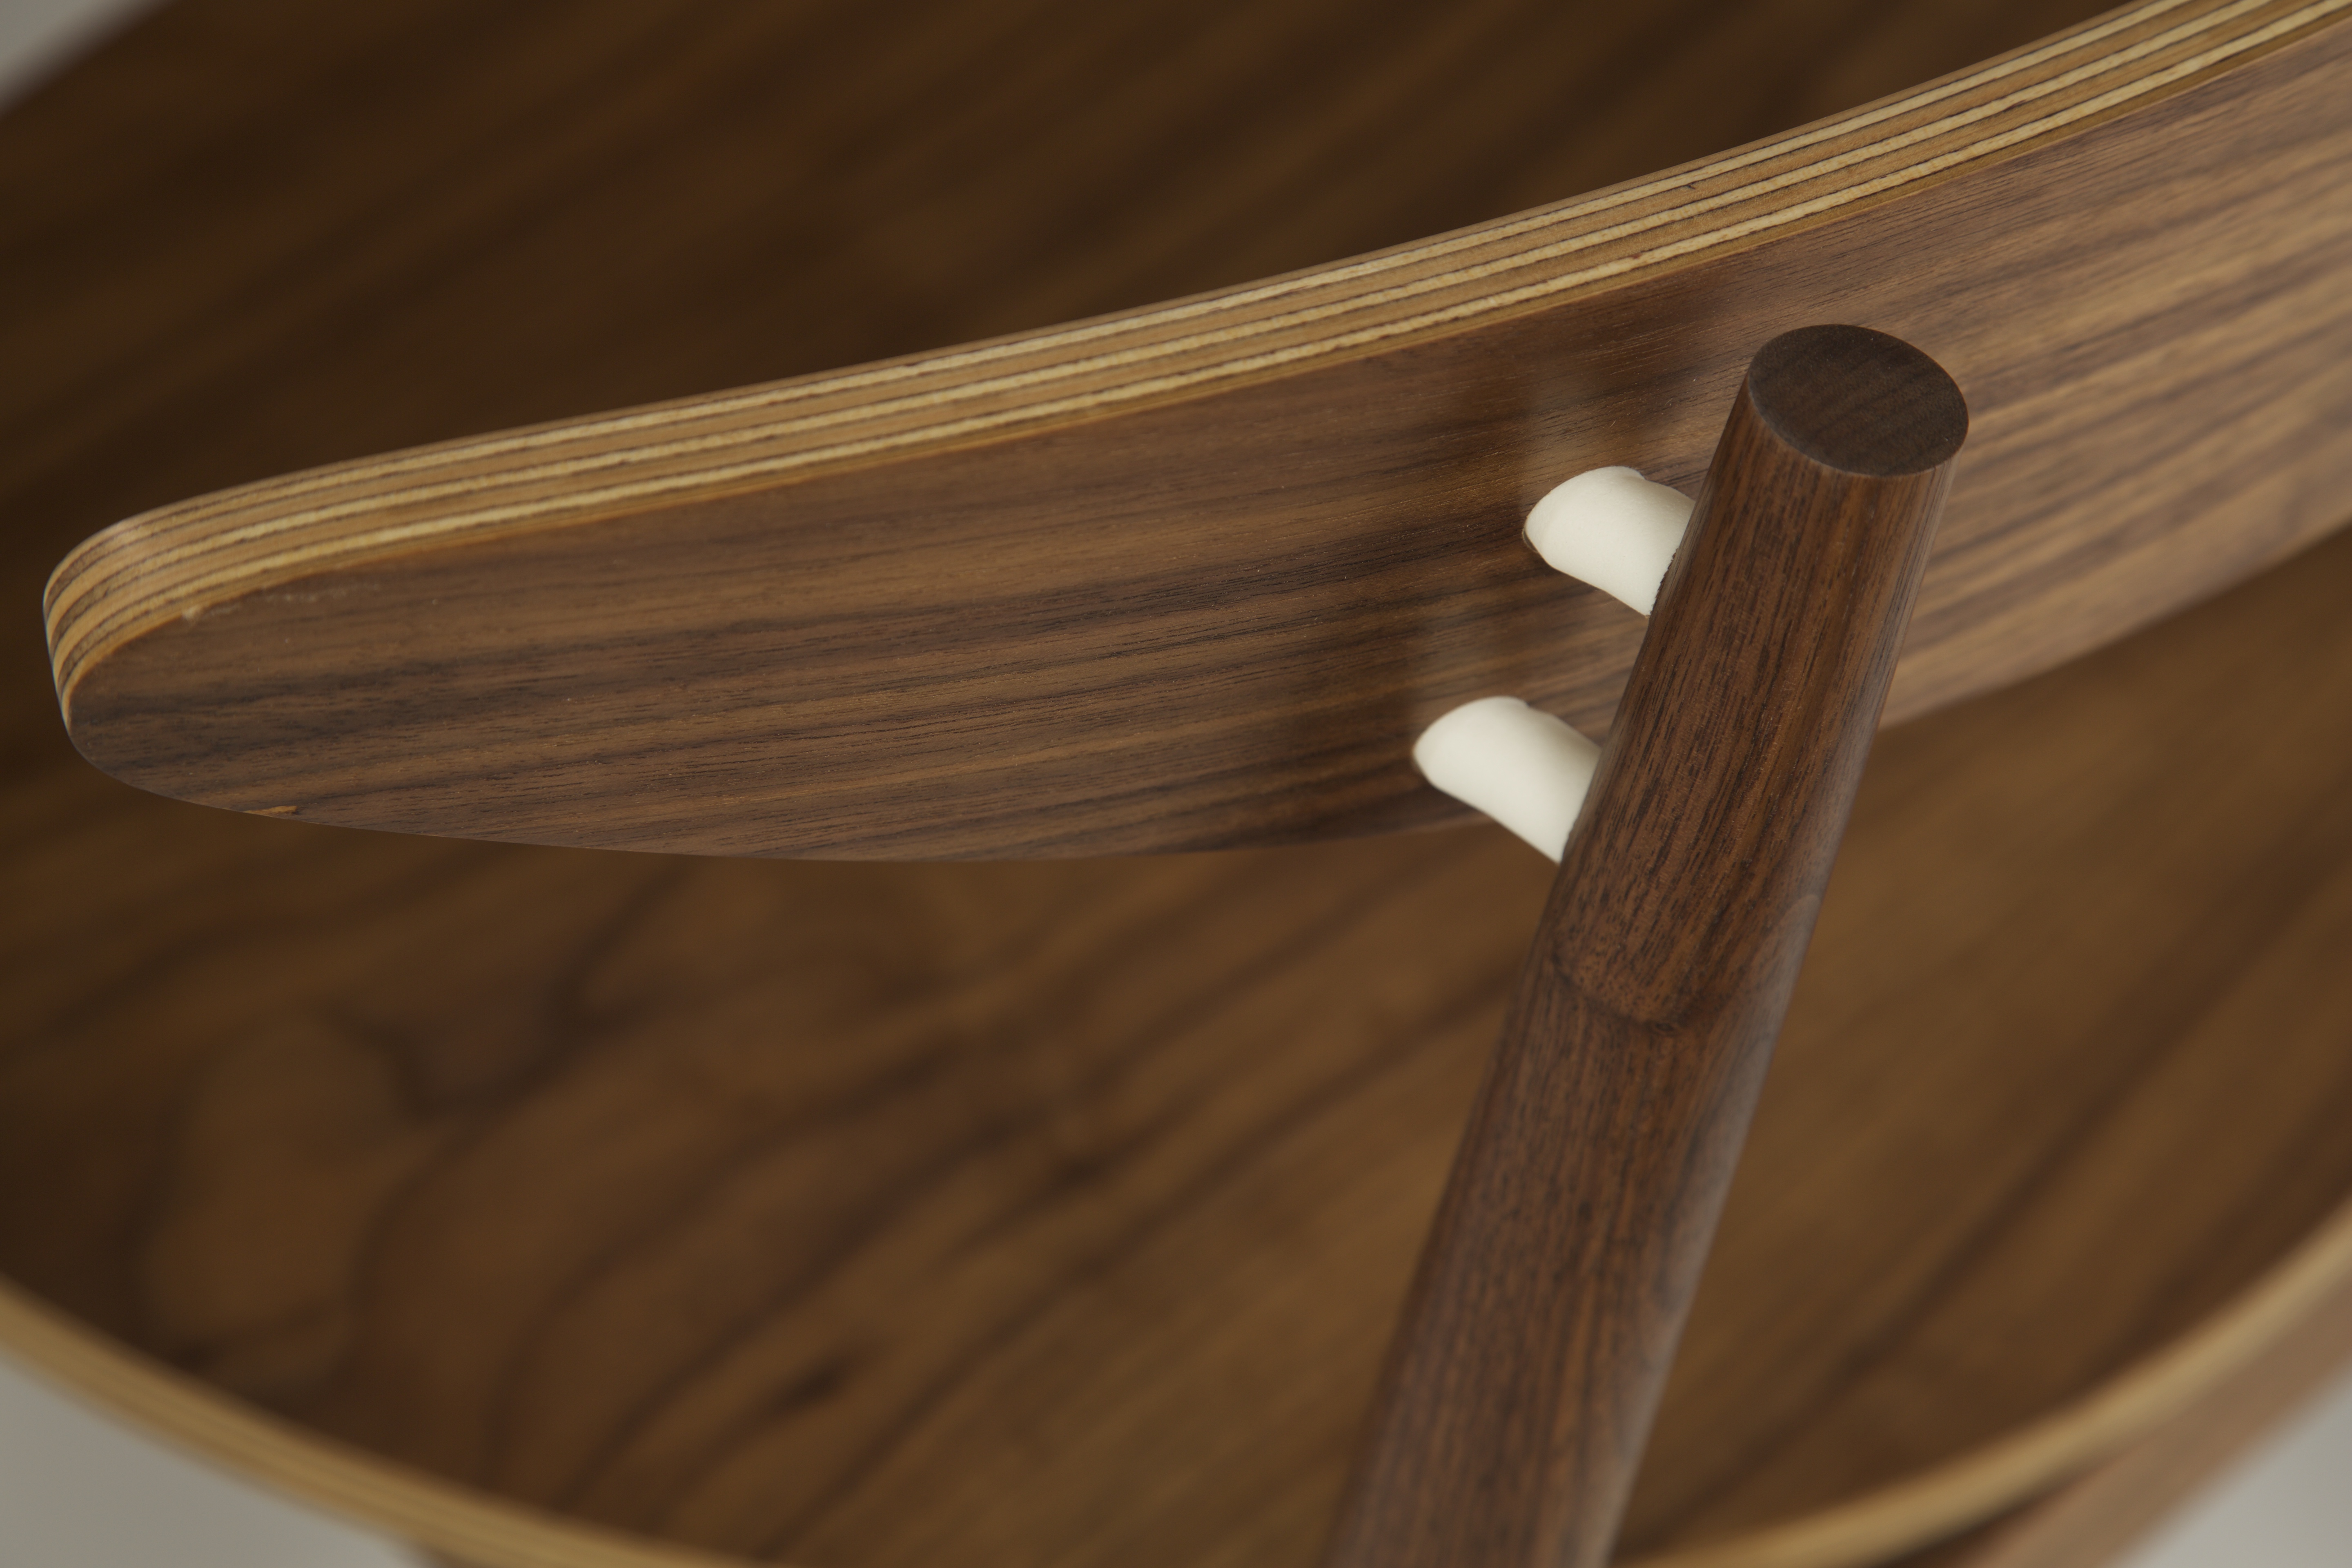 Saul chair (polyamide joint close-up)